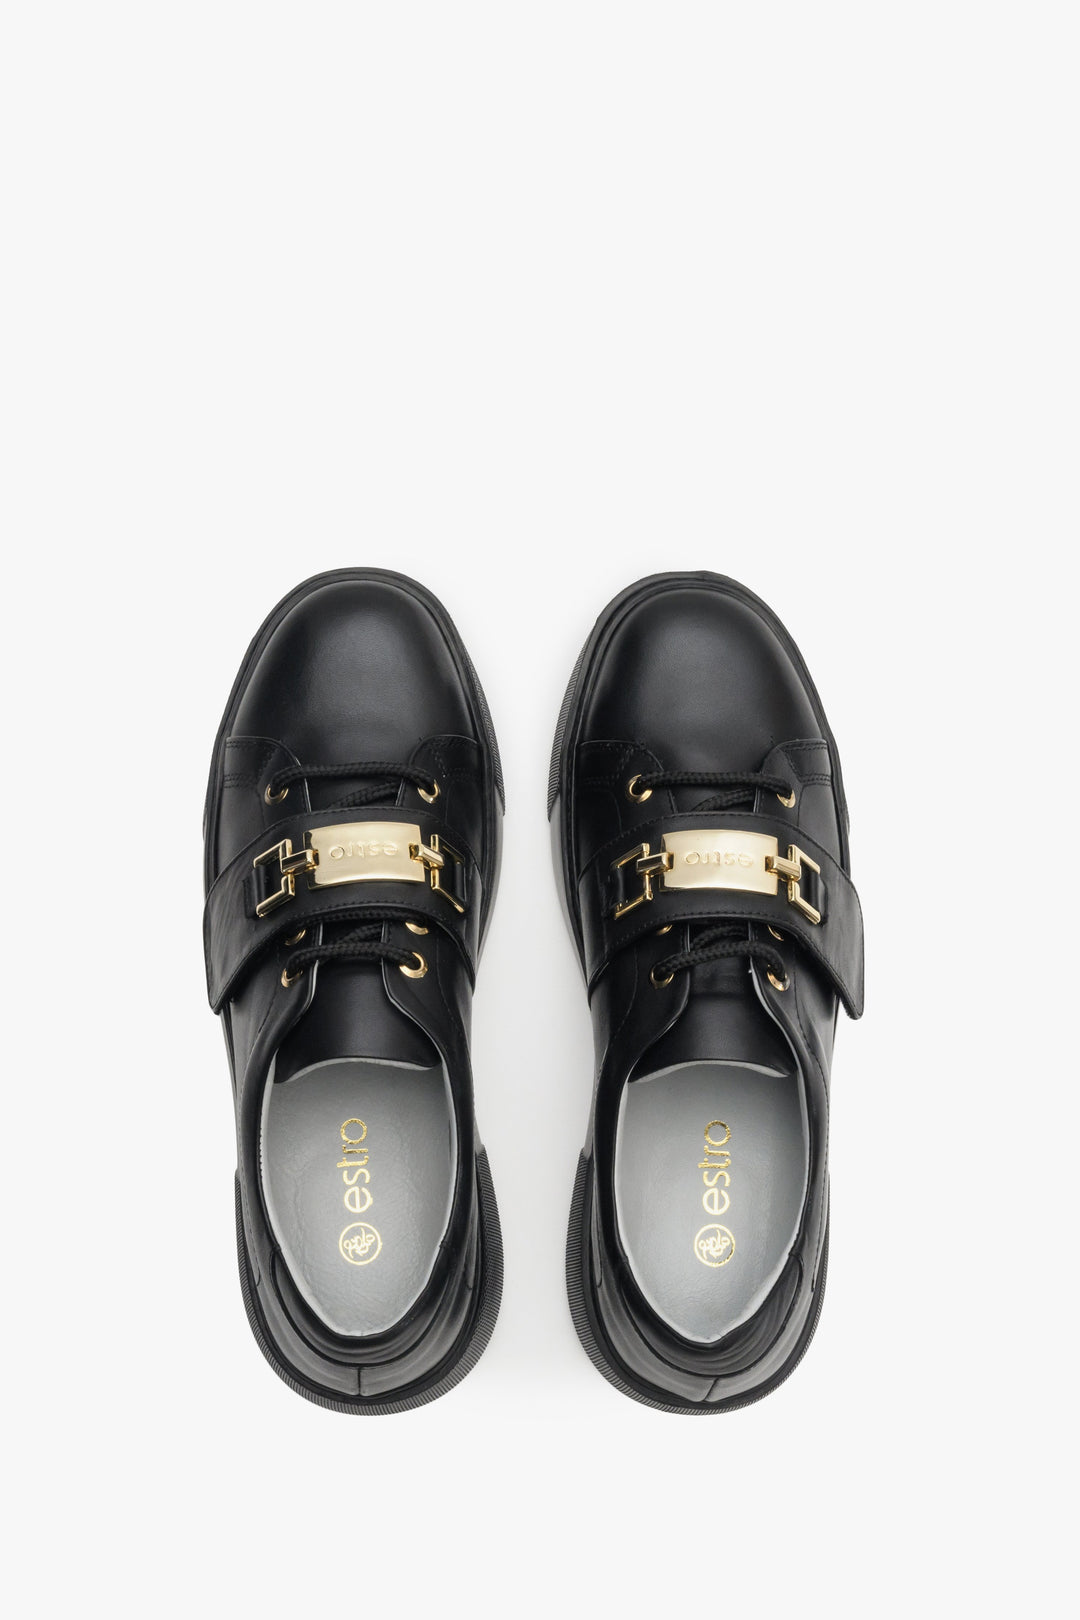 Women's black sneakers made of genuine leather with gold accents - top view shoe presentation.